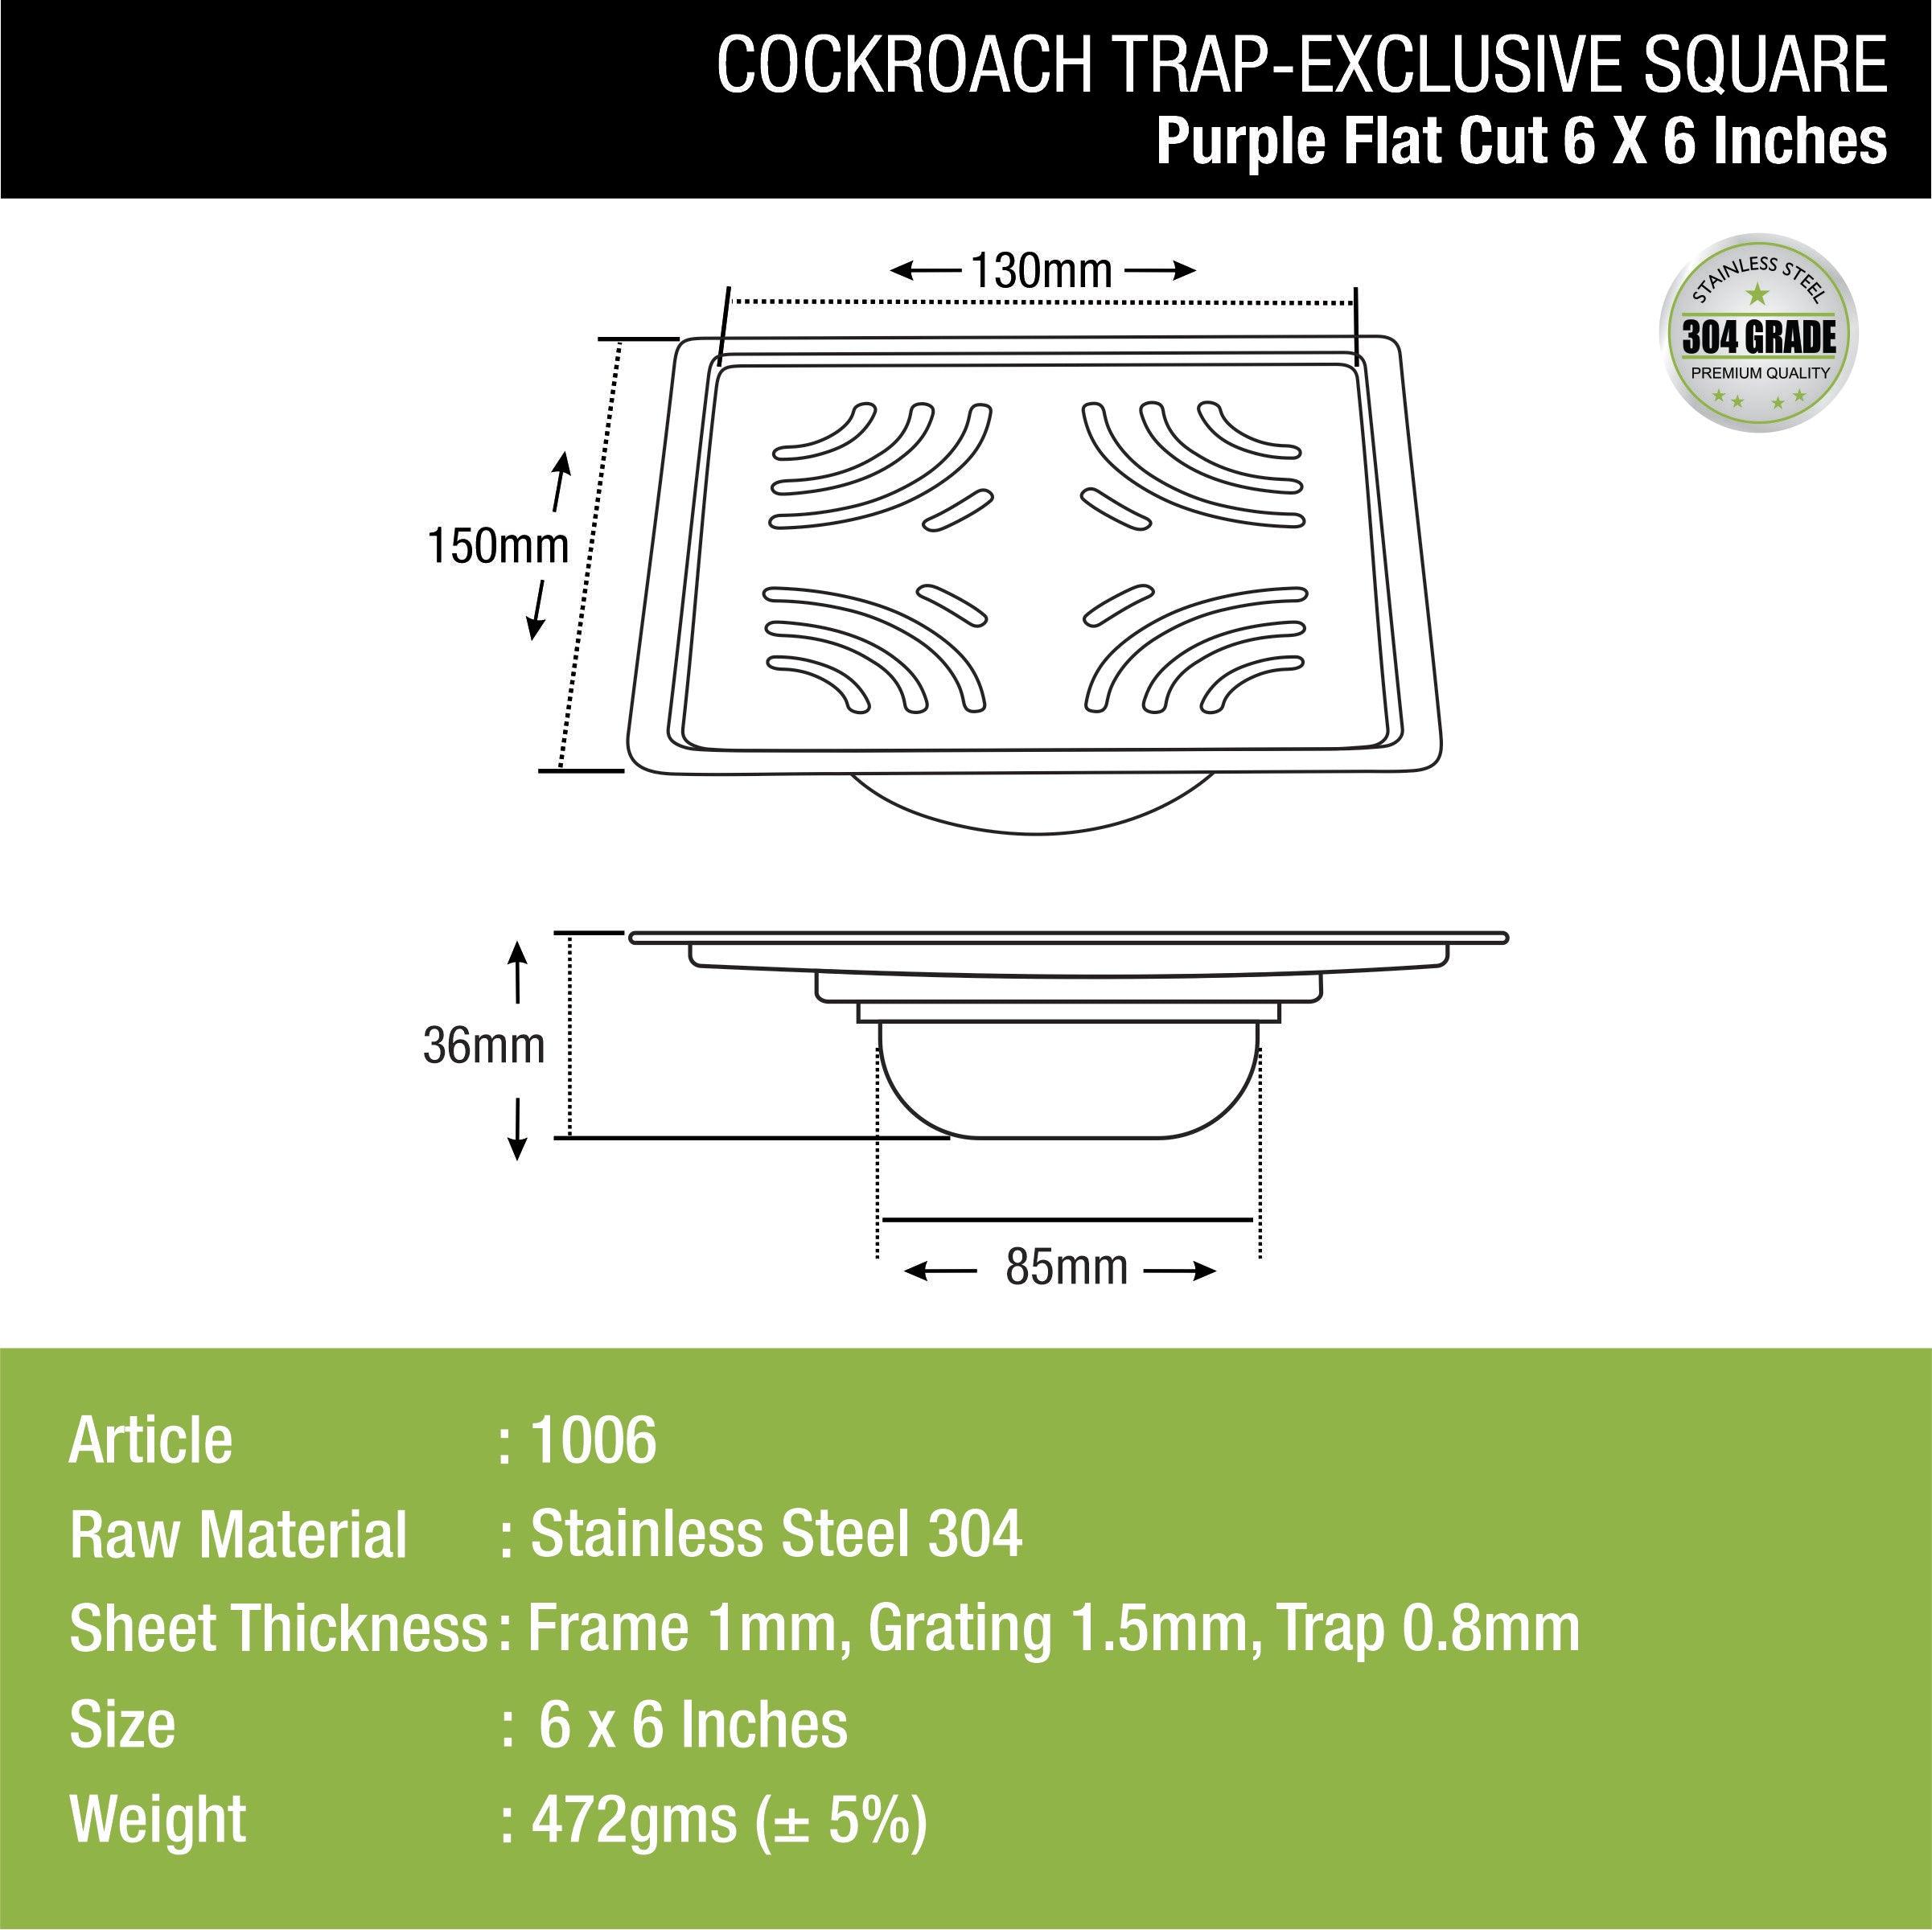 Purple Exclusive Square Flat Cut Floor Drain (6 x 6 Inches) with Cockroach Trap  dimensions and sizes